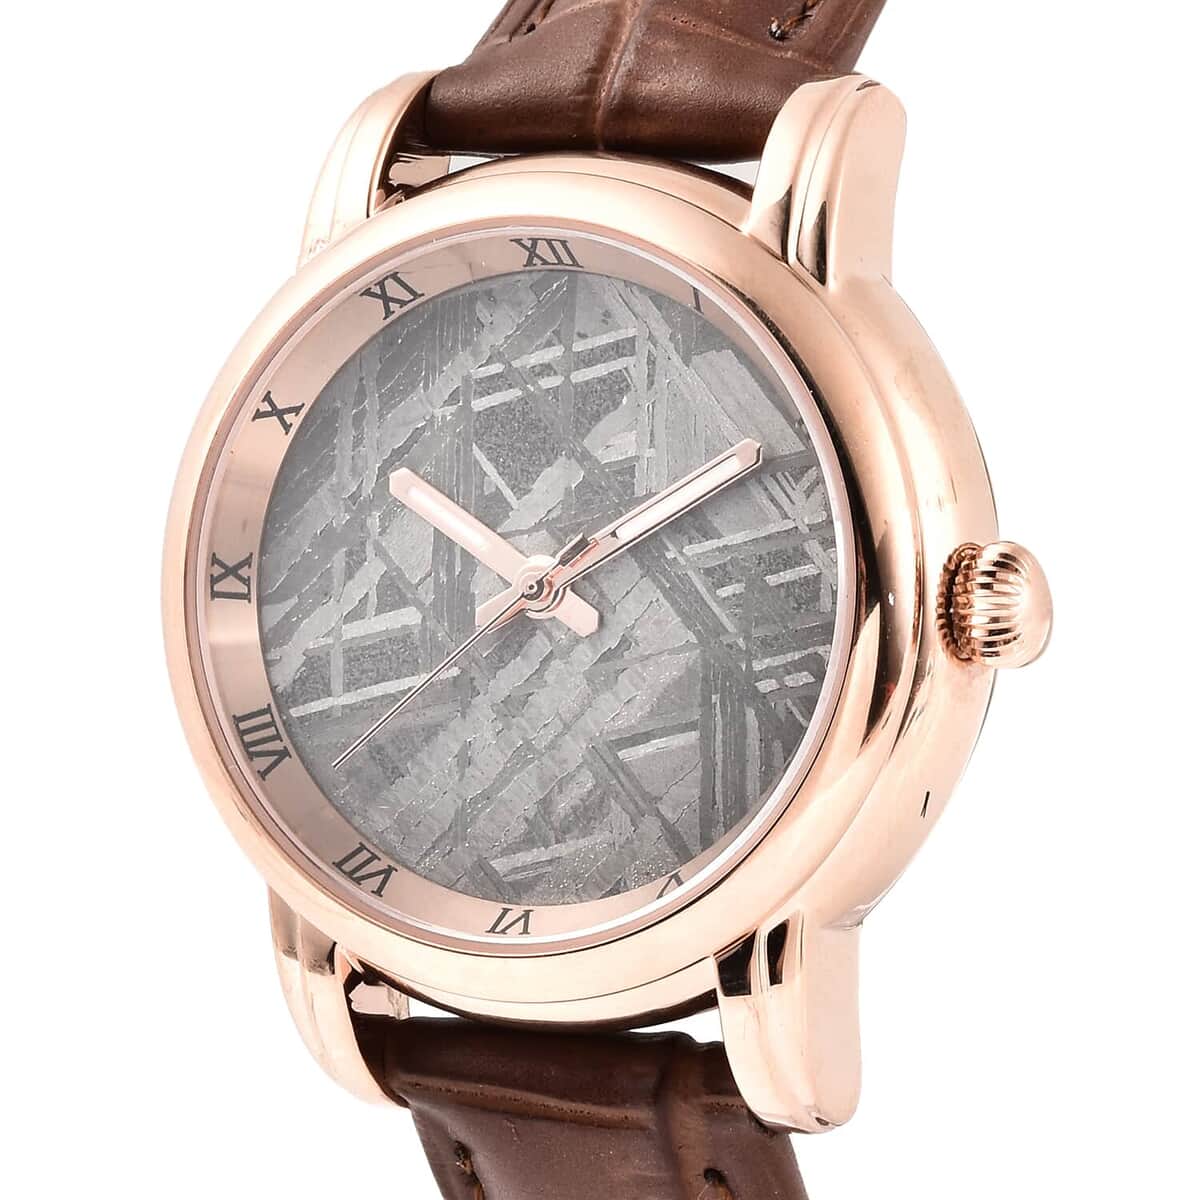 Eon 1962 Swiss Movement Watch with Marvelous Meteorite Dial & Light Brown Leather Strap, Designer Gemstone Watch, Analog Luxury Wristwatch image number 3